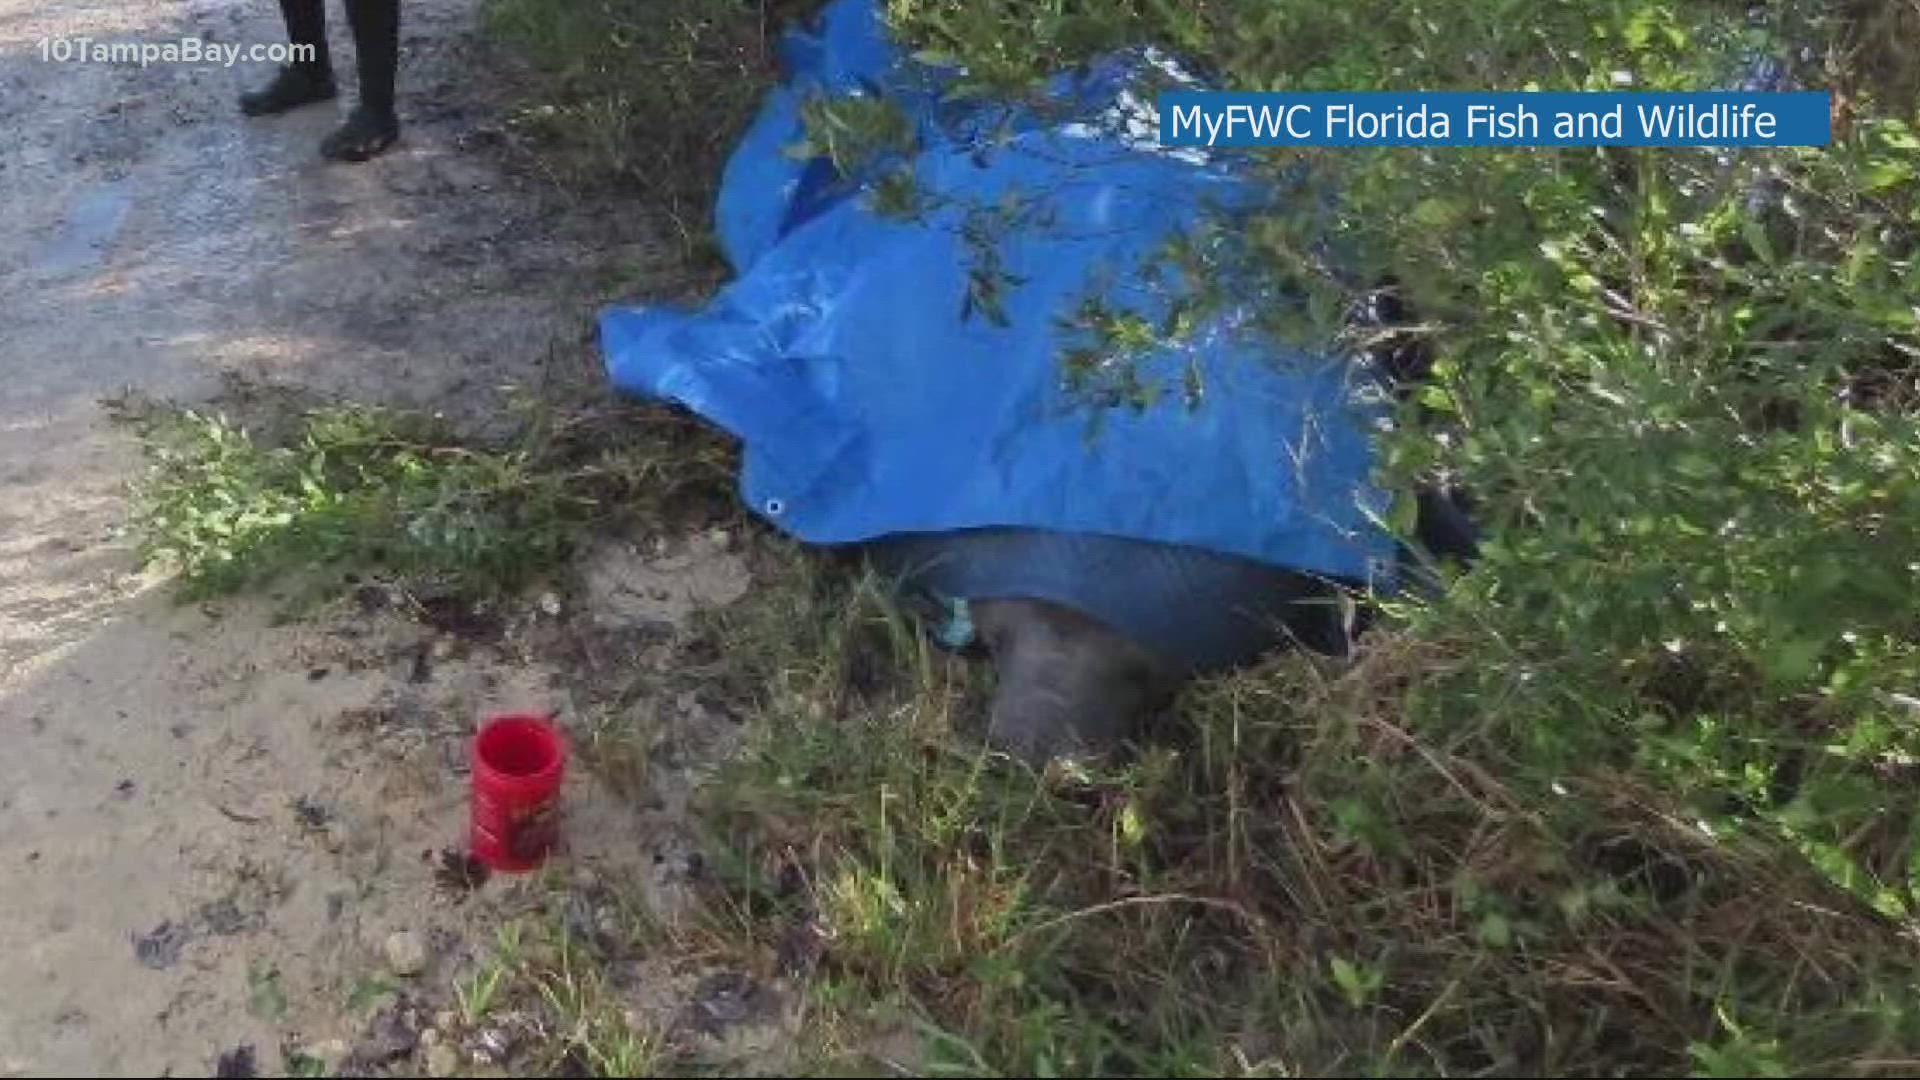 Florida Fish and Wildlife says it likely swam near the road during high tide and became stuck when the water receded.